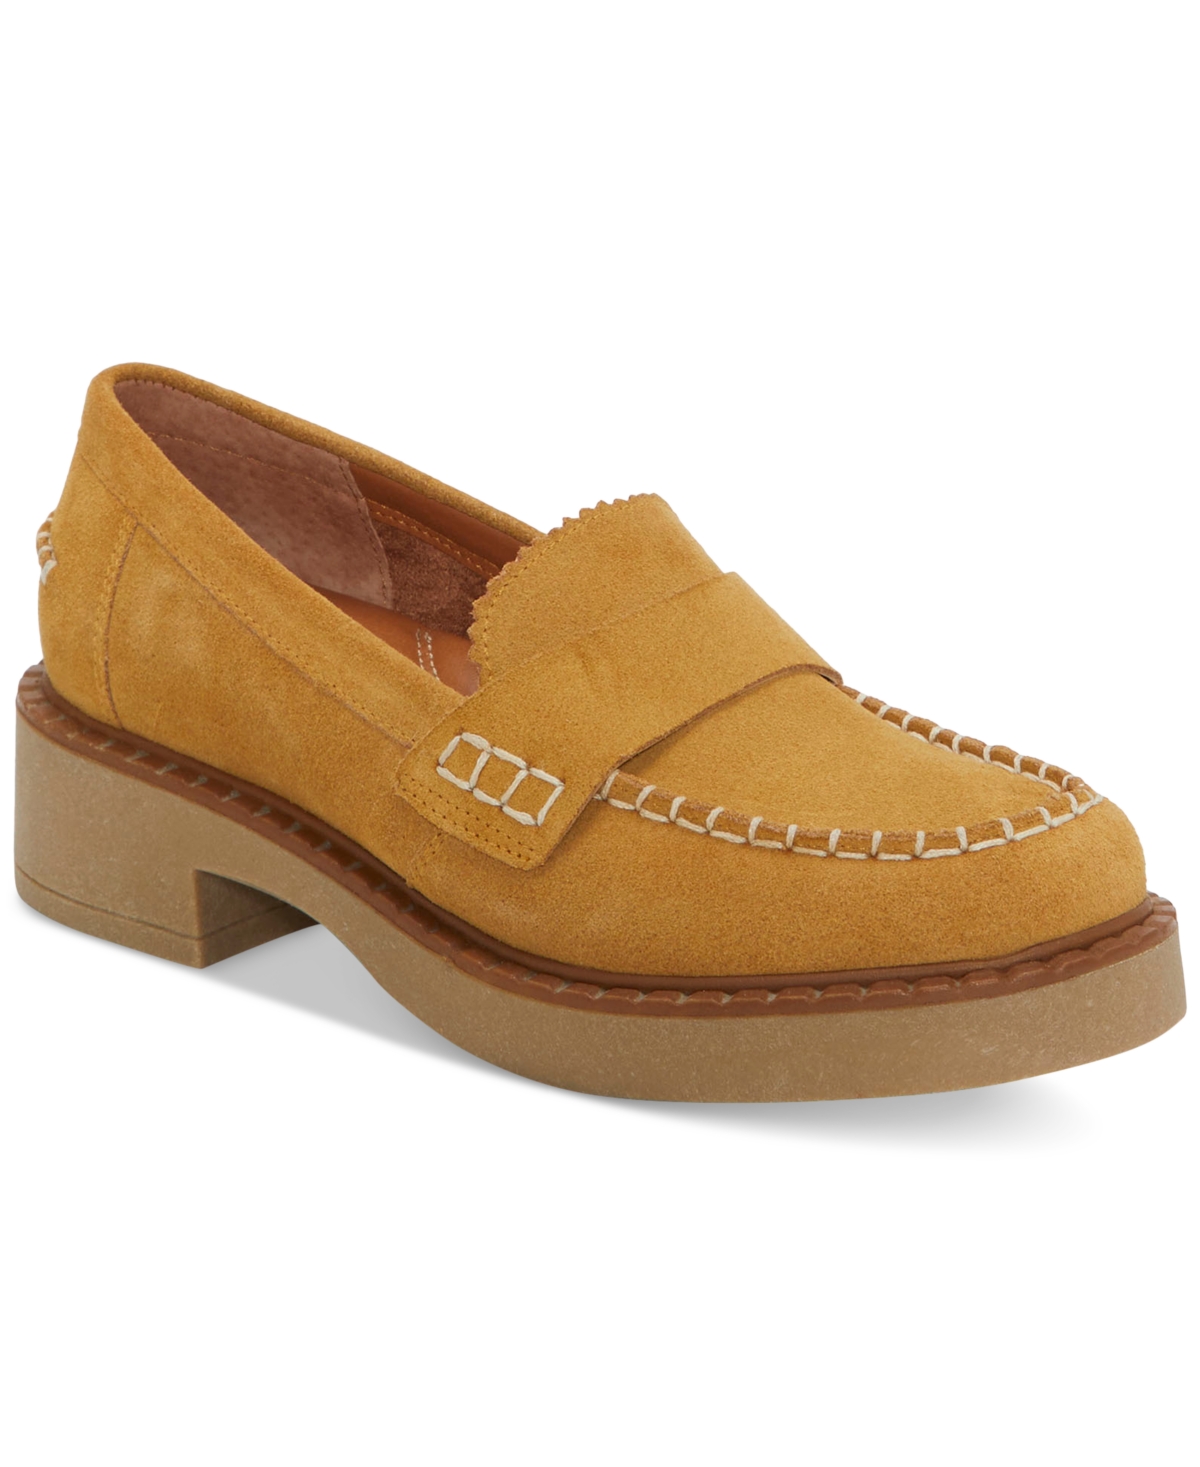 Women's Larissah Moccasin Flat Loafers - Cuoio Suede